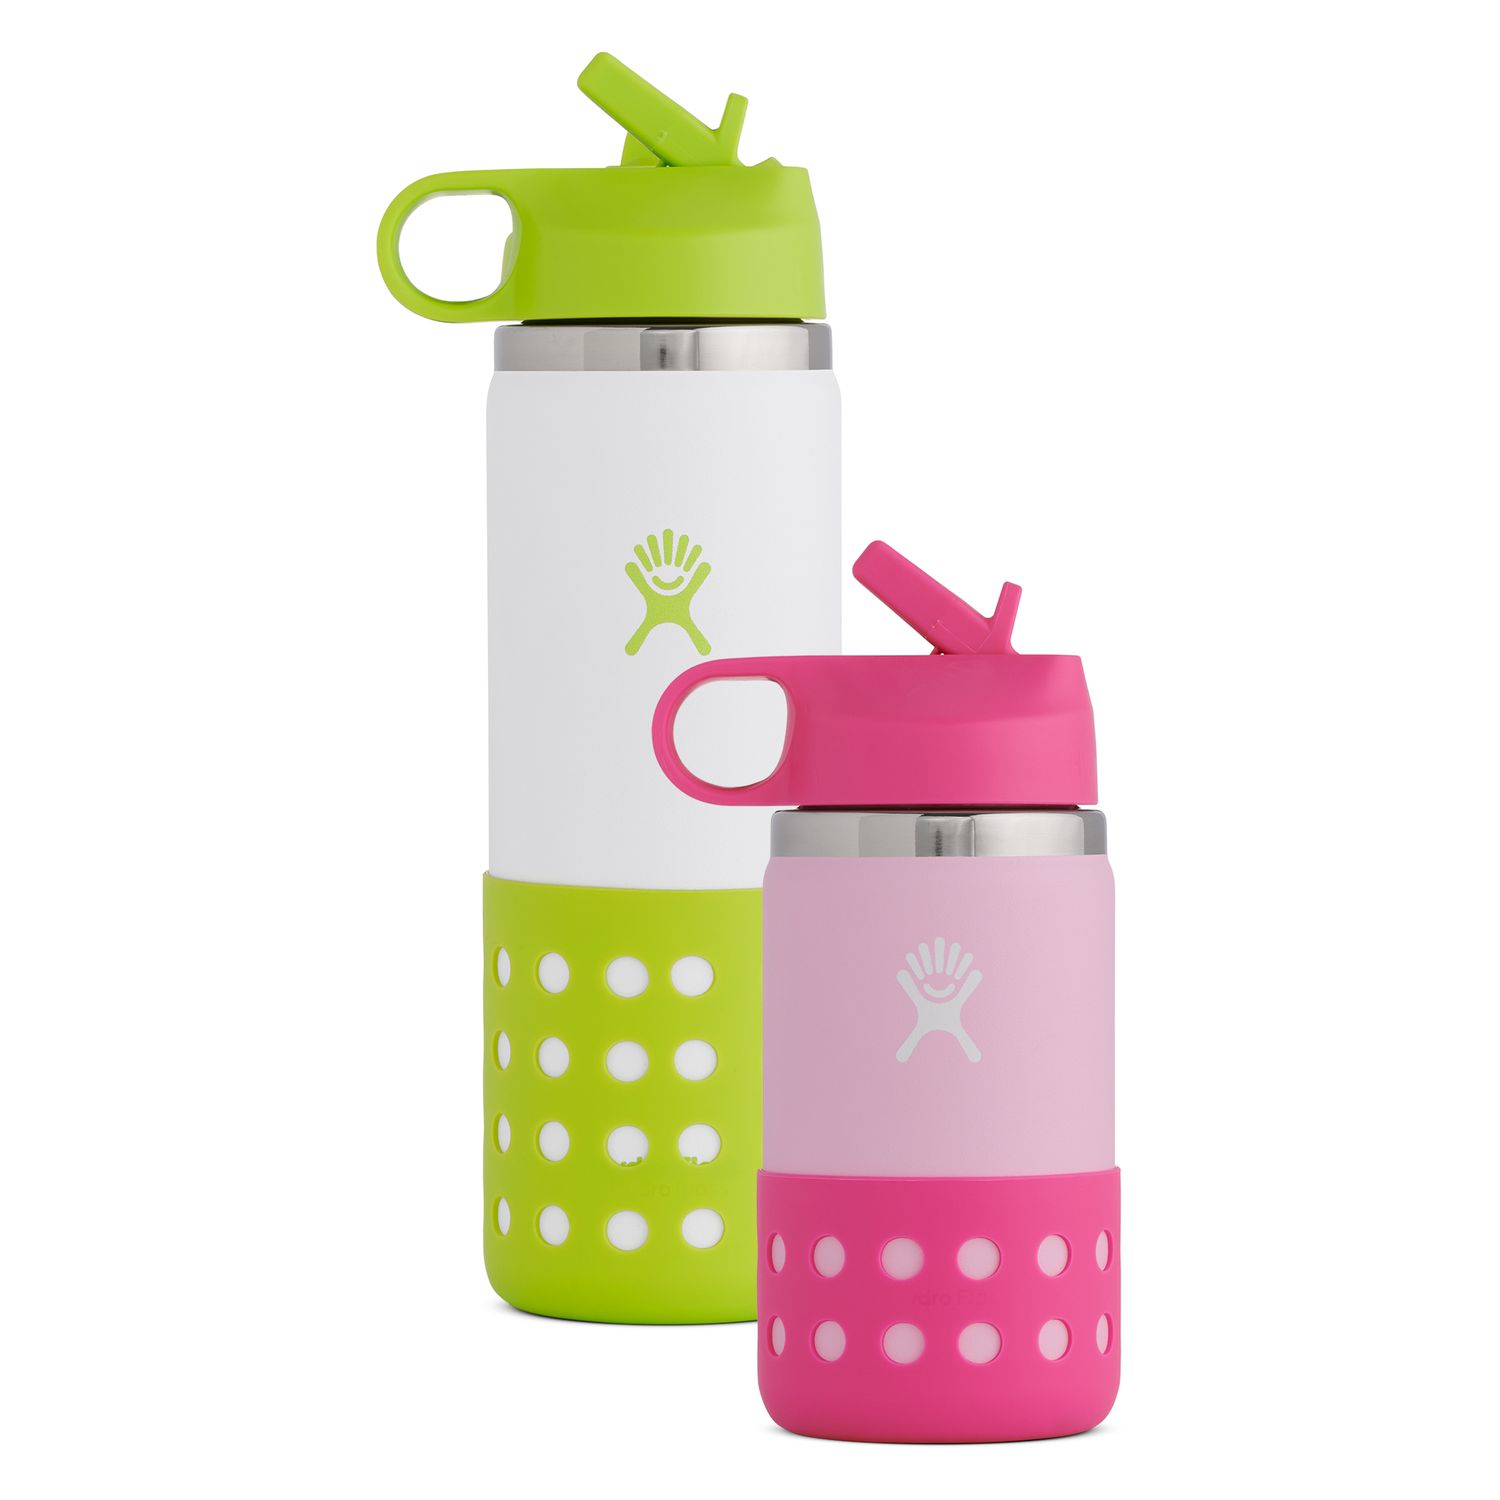 Hydro Flask water bottle in both the 12 oz and 20 oz